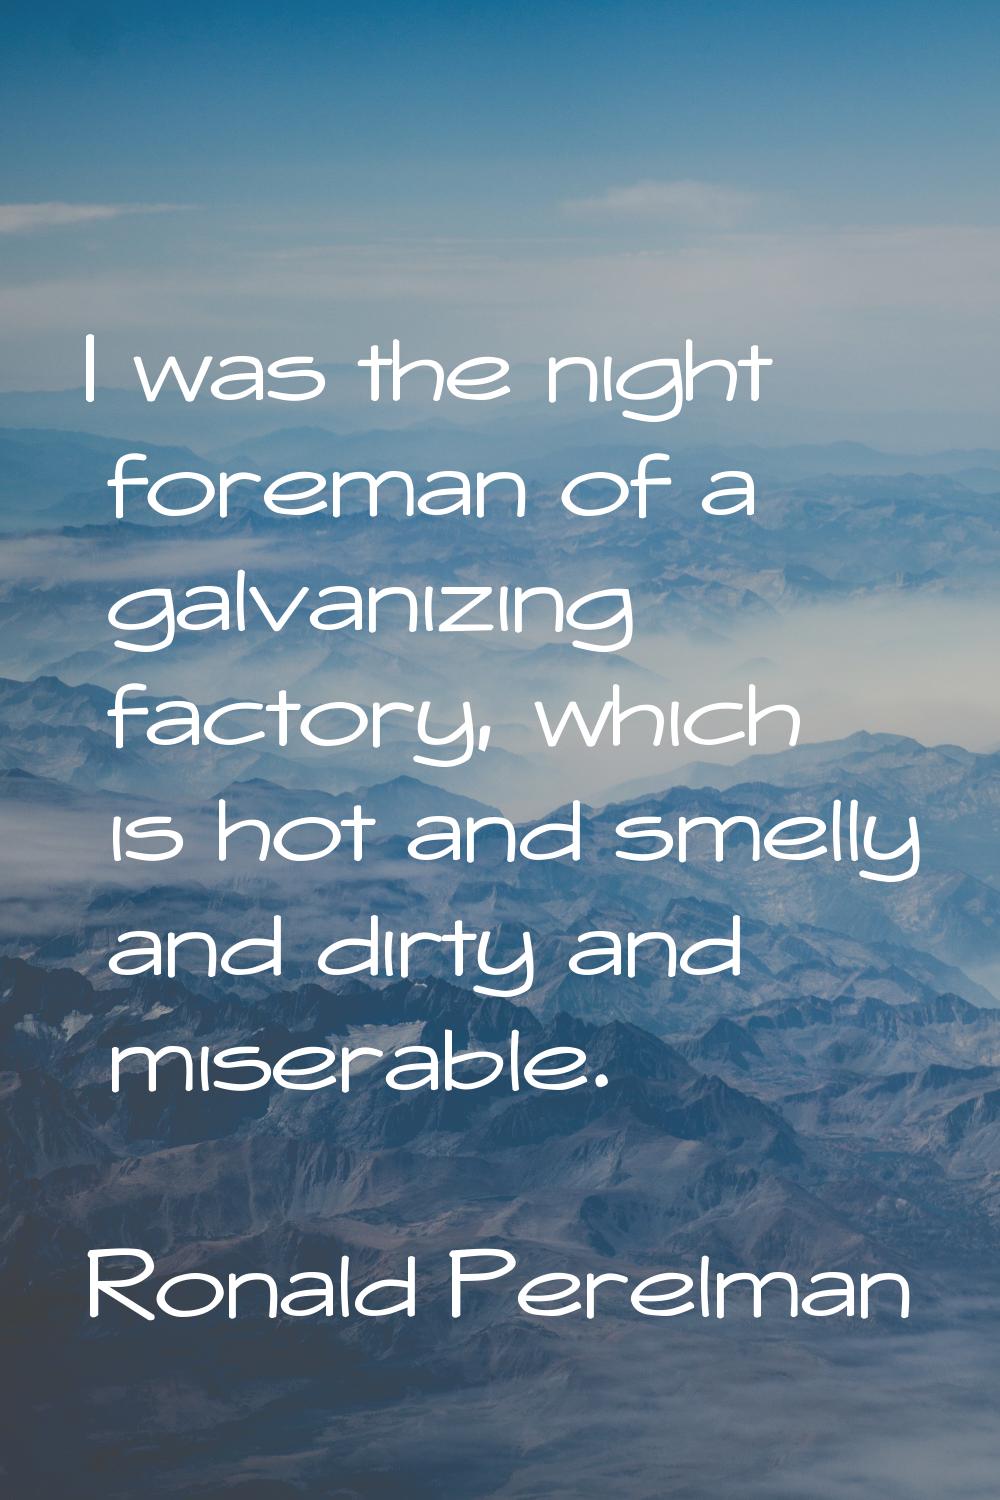 I was the night foreman of a galvanizing factory, which is hot and smelly and dirty and miserable.